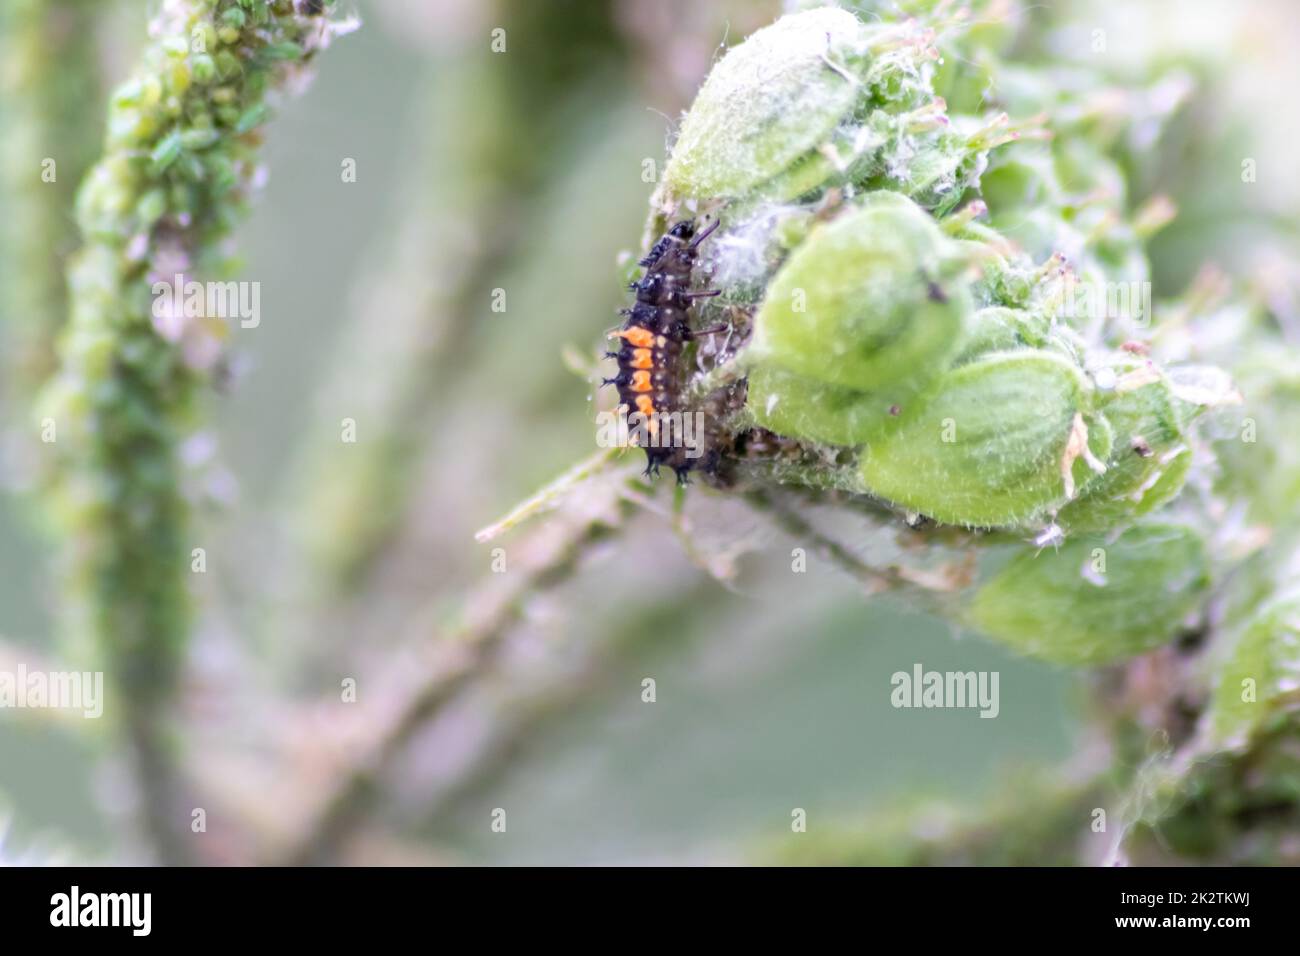 New born ladybug eclosing green leaf switches from larva to ladybug beetle with black dots red wings show new born lucky talisman harmony natural pest control in agriculture Stock Photo